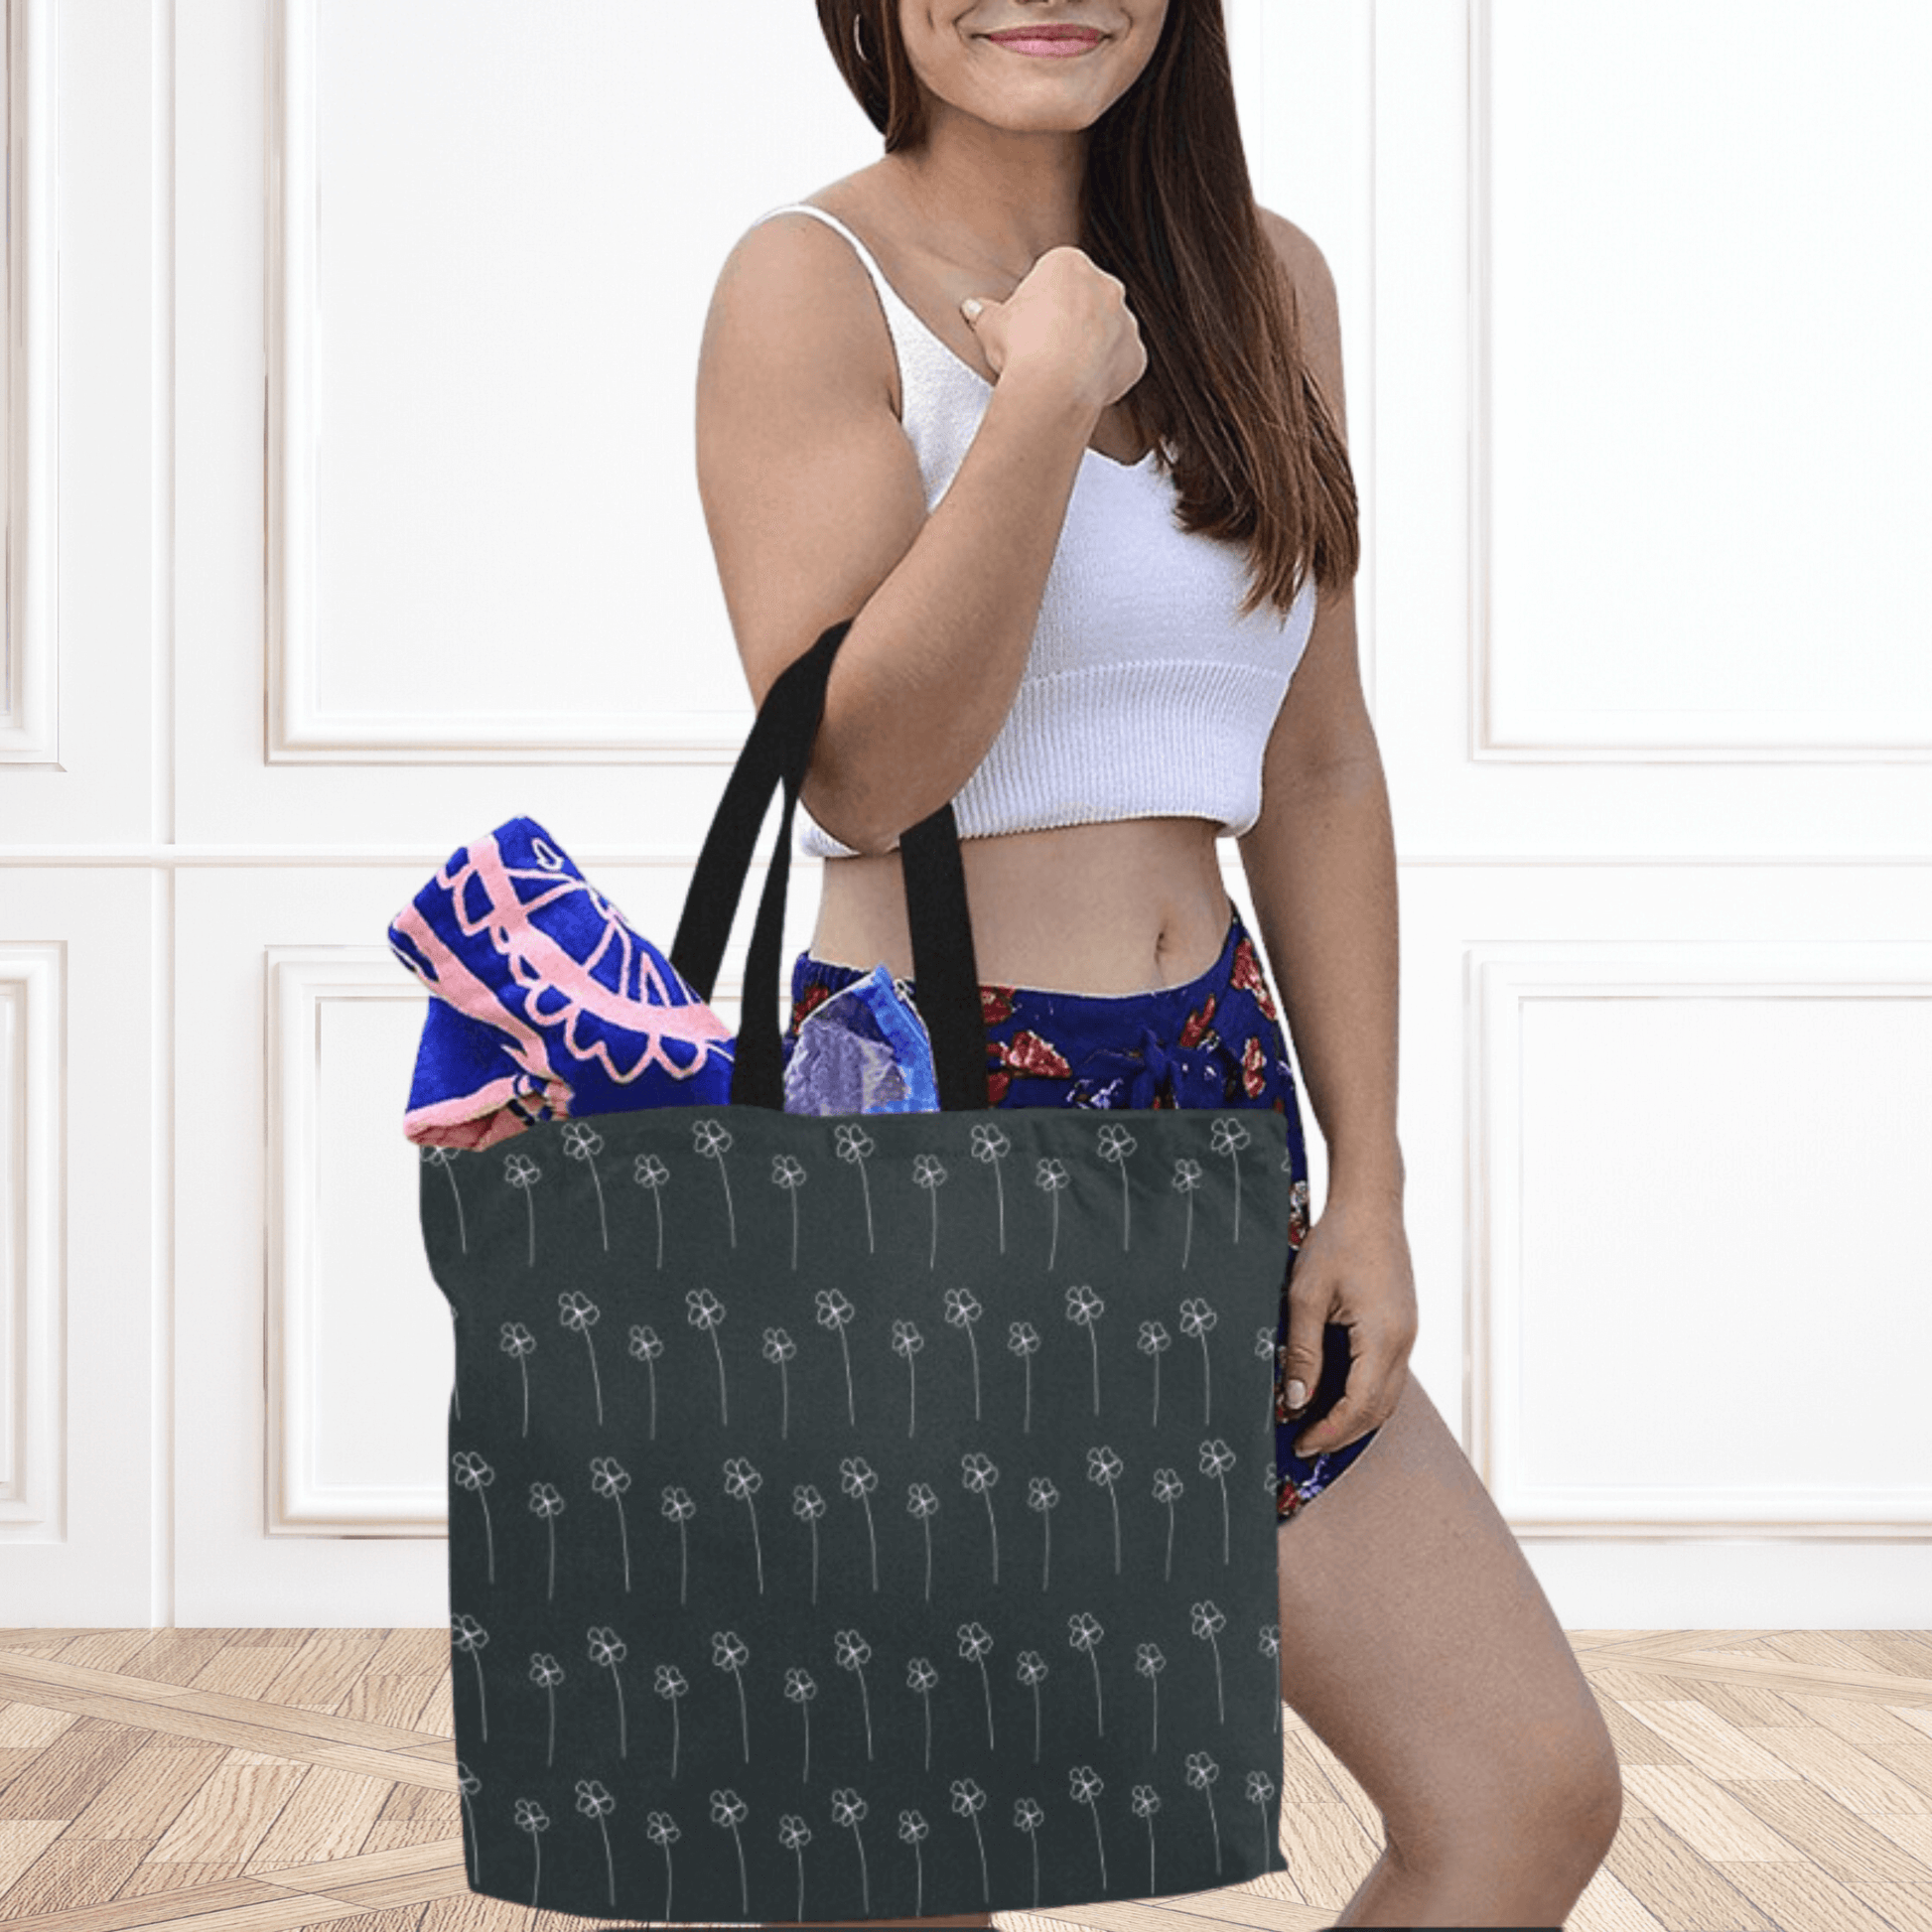 Black handles make carrying this tote easy for our model